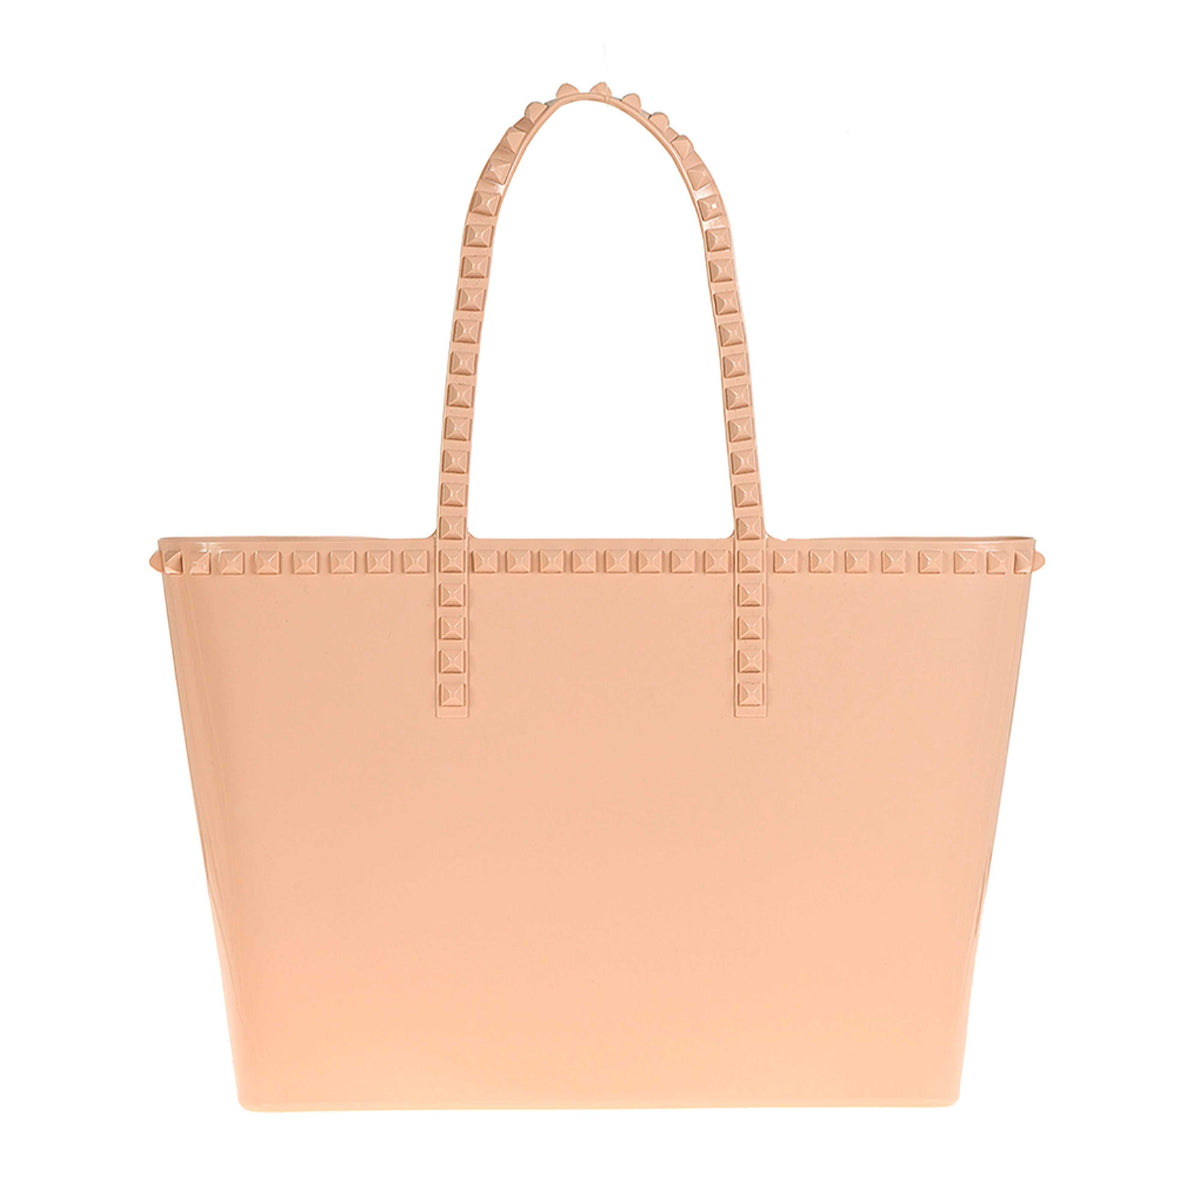 Made in Italy studded big purse in color blush from Carmen Sol